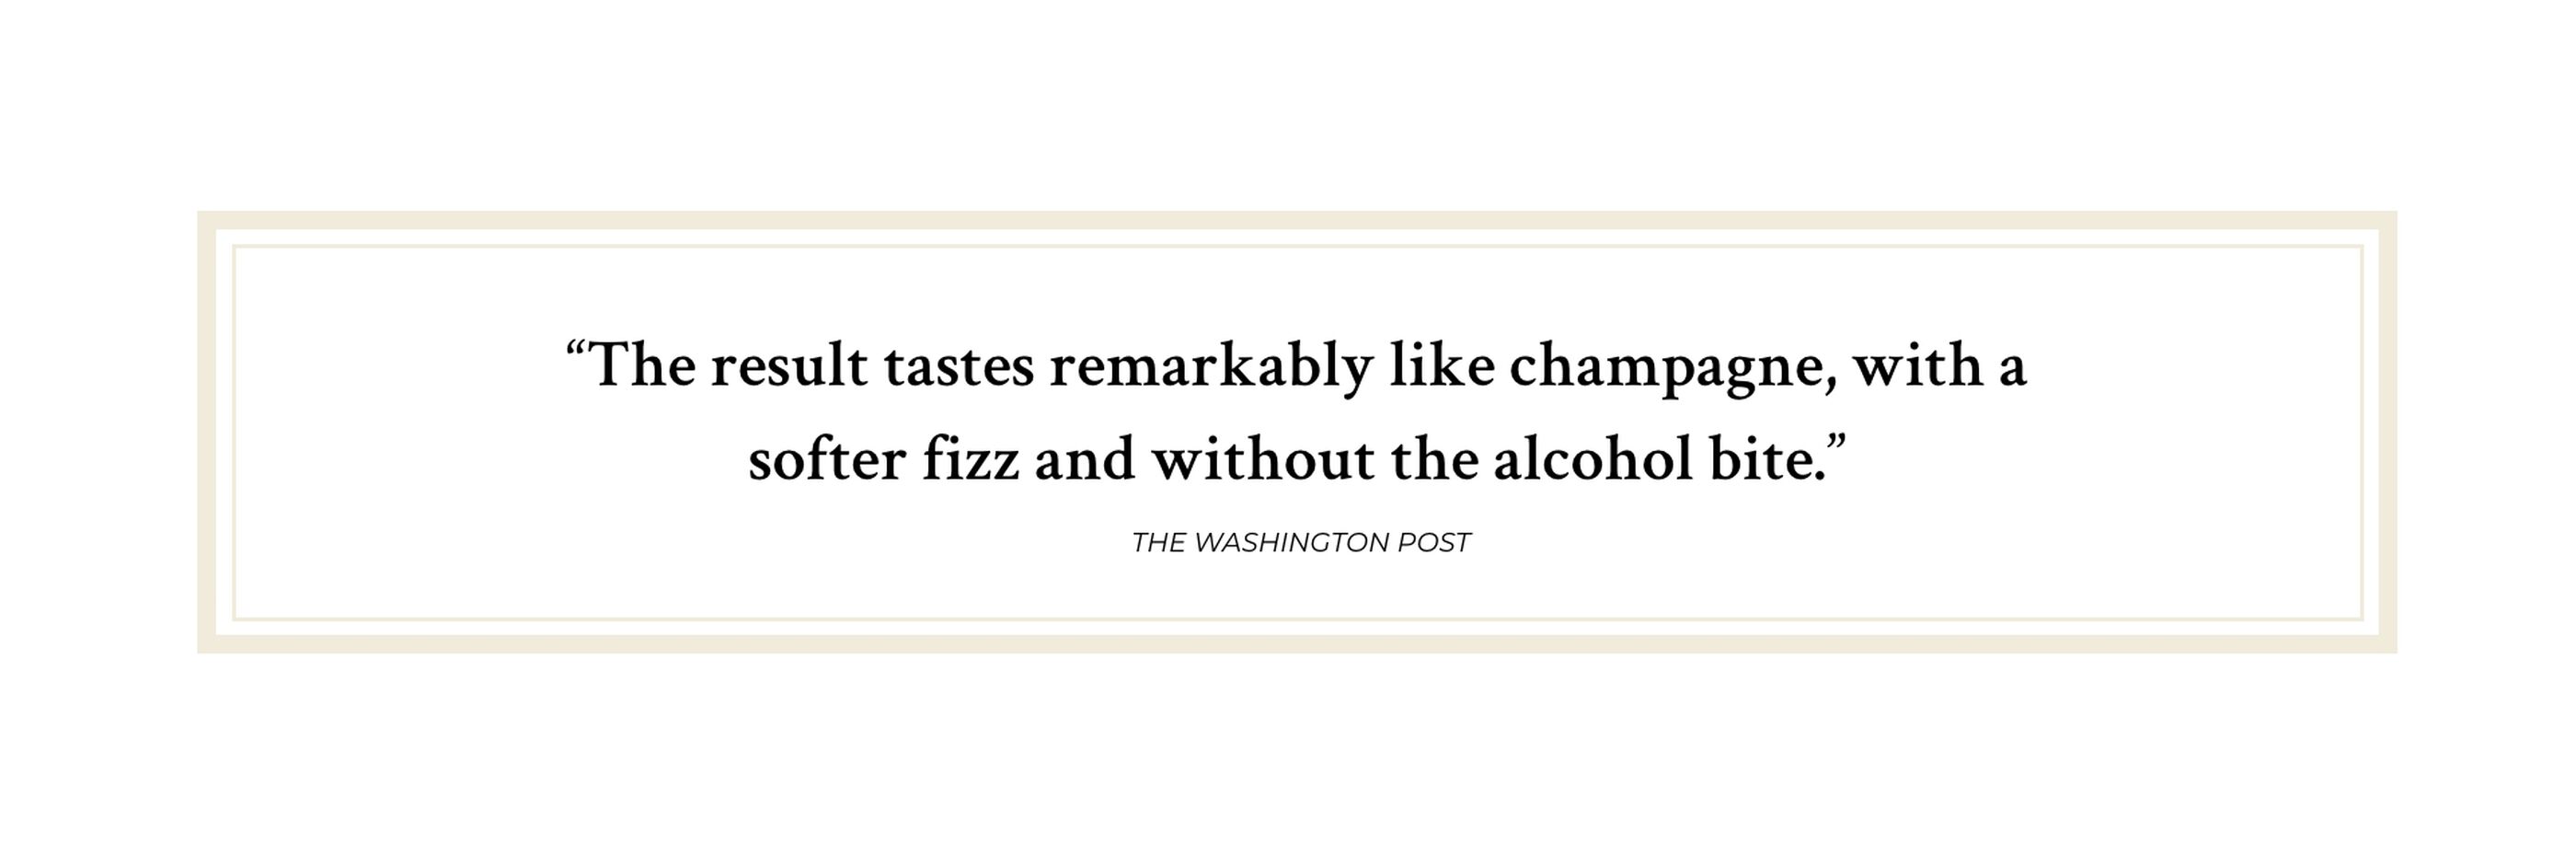 Quote: The result tastes remarkably like champagne, with a softer fizz and without the alcohol bite.